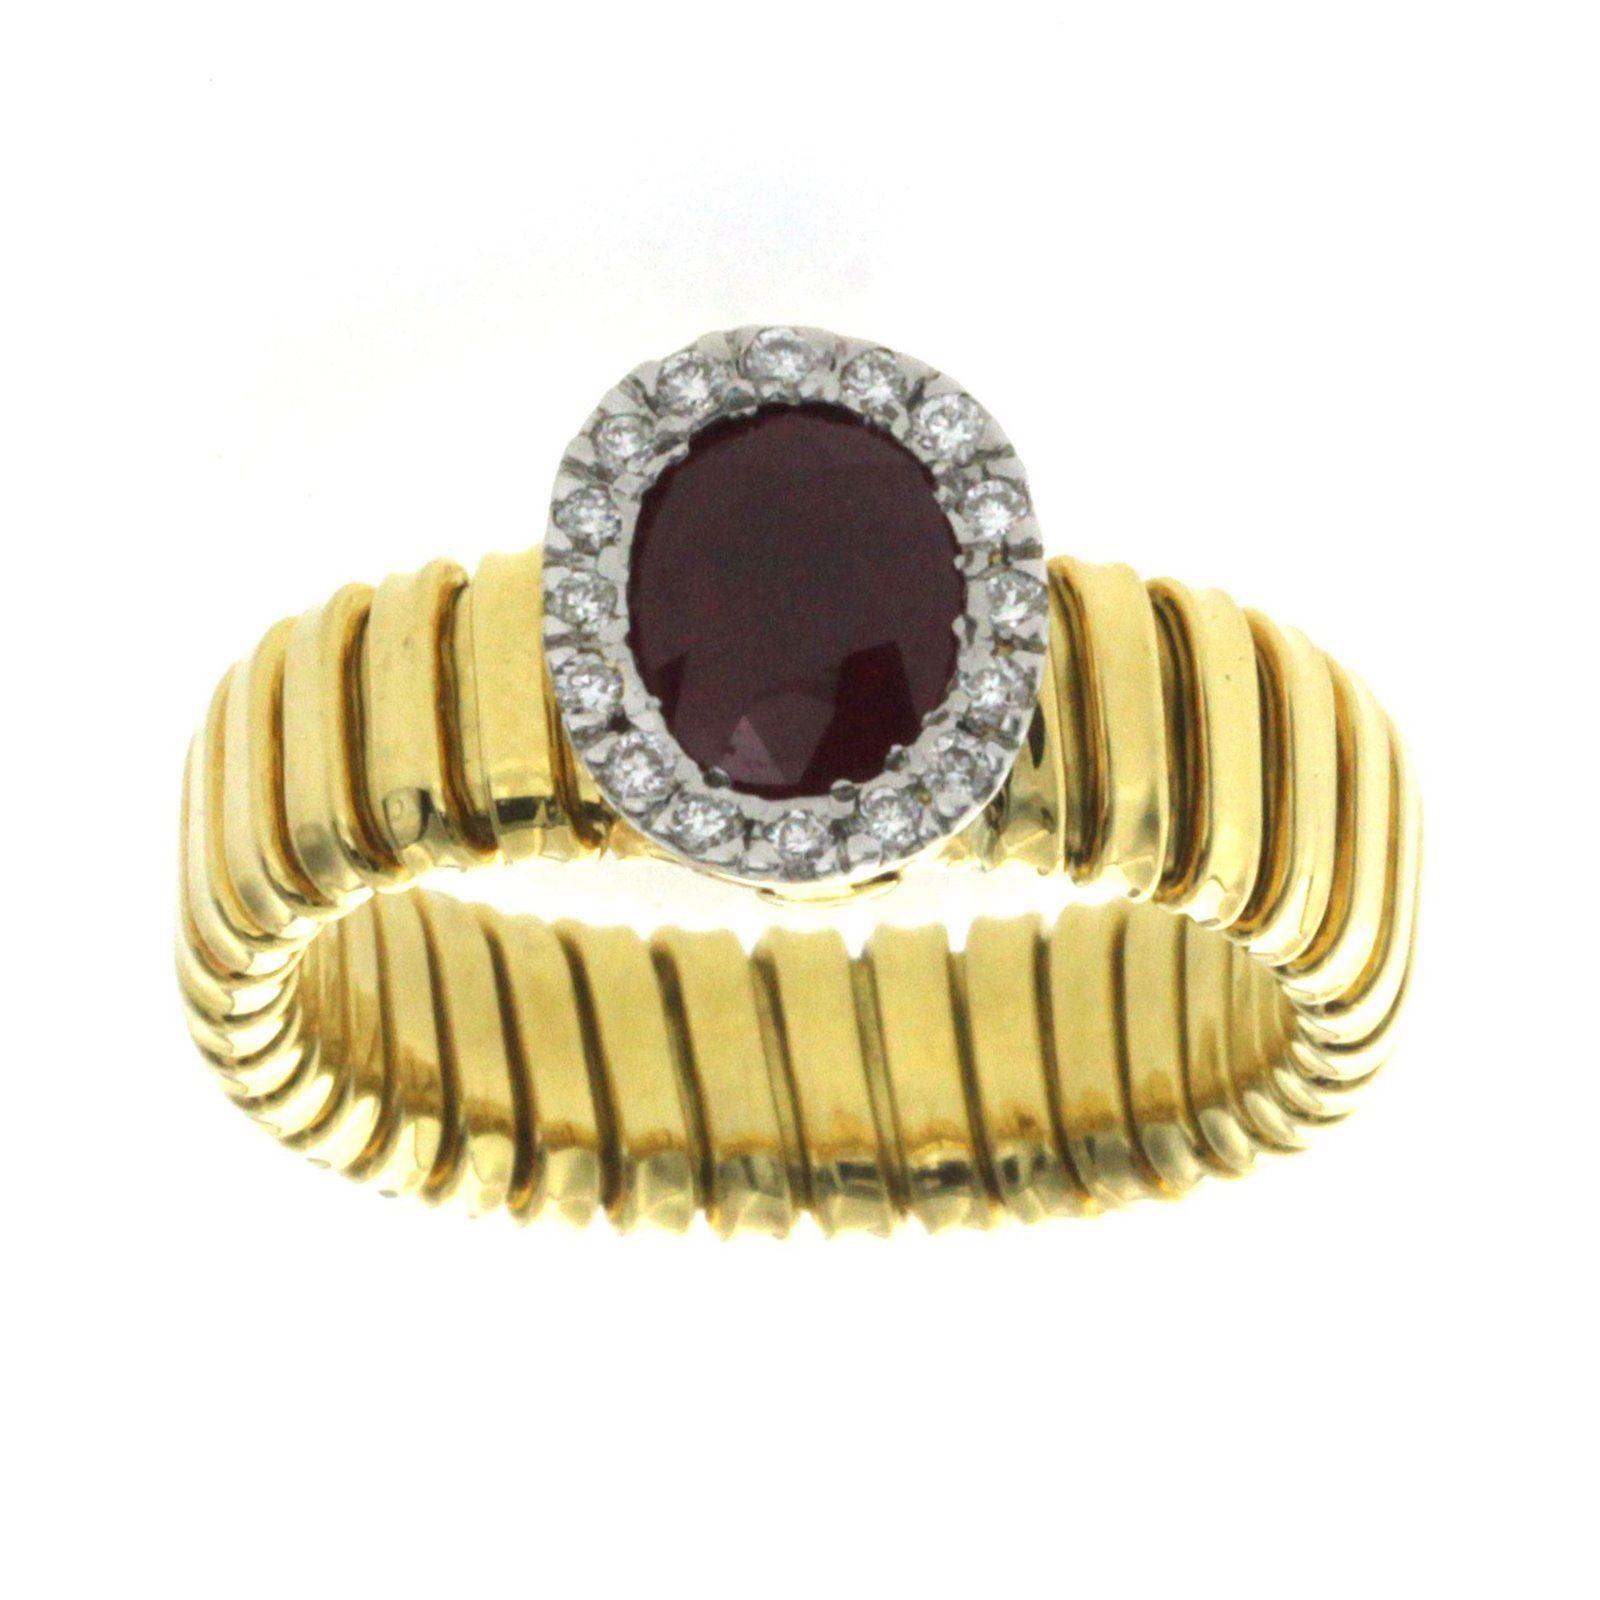 Top: 11 mm
Band Width: 6 mm
Metal: 18K Yellow Gold
Size: 10-10.5
Hallmarks: 18K
Total Weight: 7.4 Grams
Stone Type: 1.20 CT Burma Ruby & 0.15 CT G SI1 Diamonds
Condition: New
Estimated Retail Price: $6800
Stock Number: 30-02216